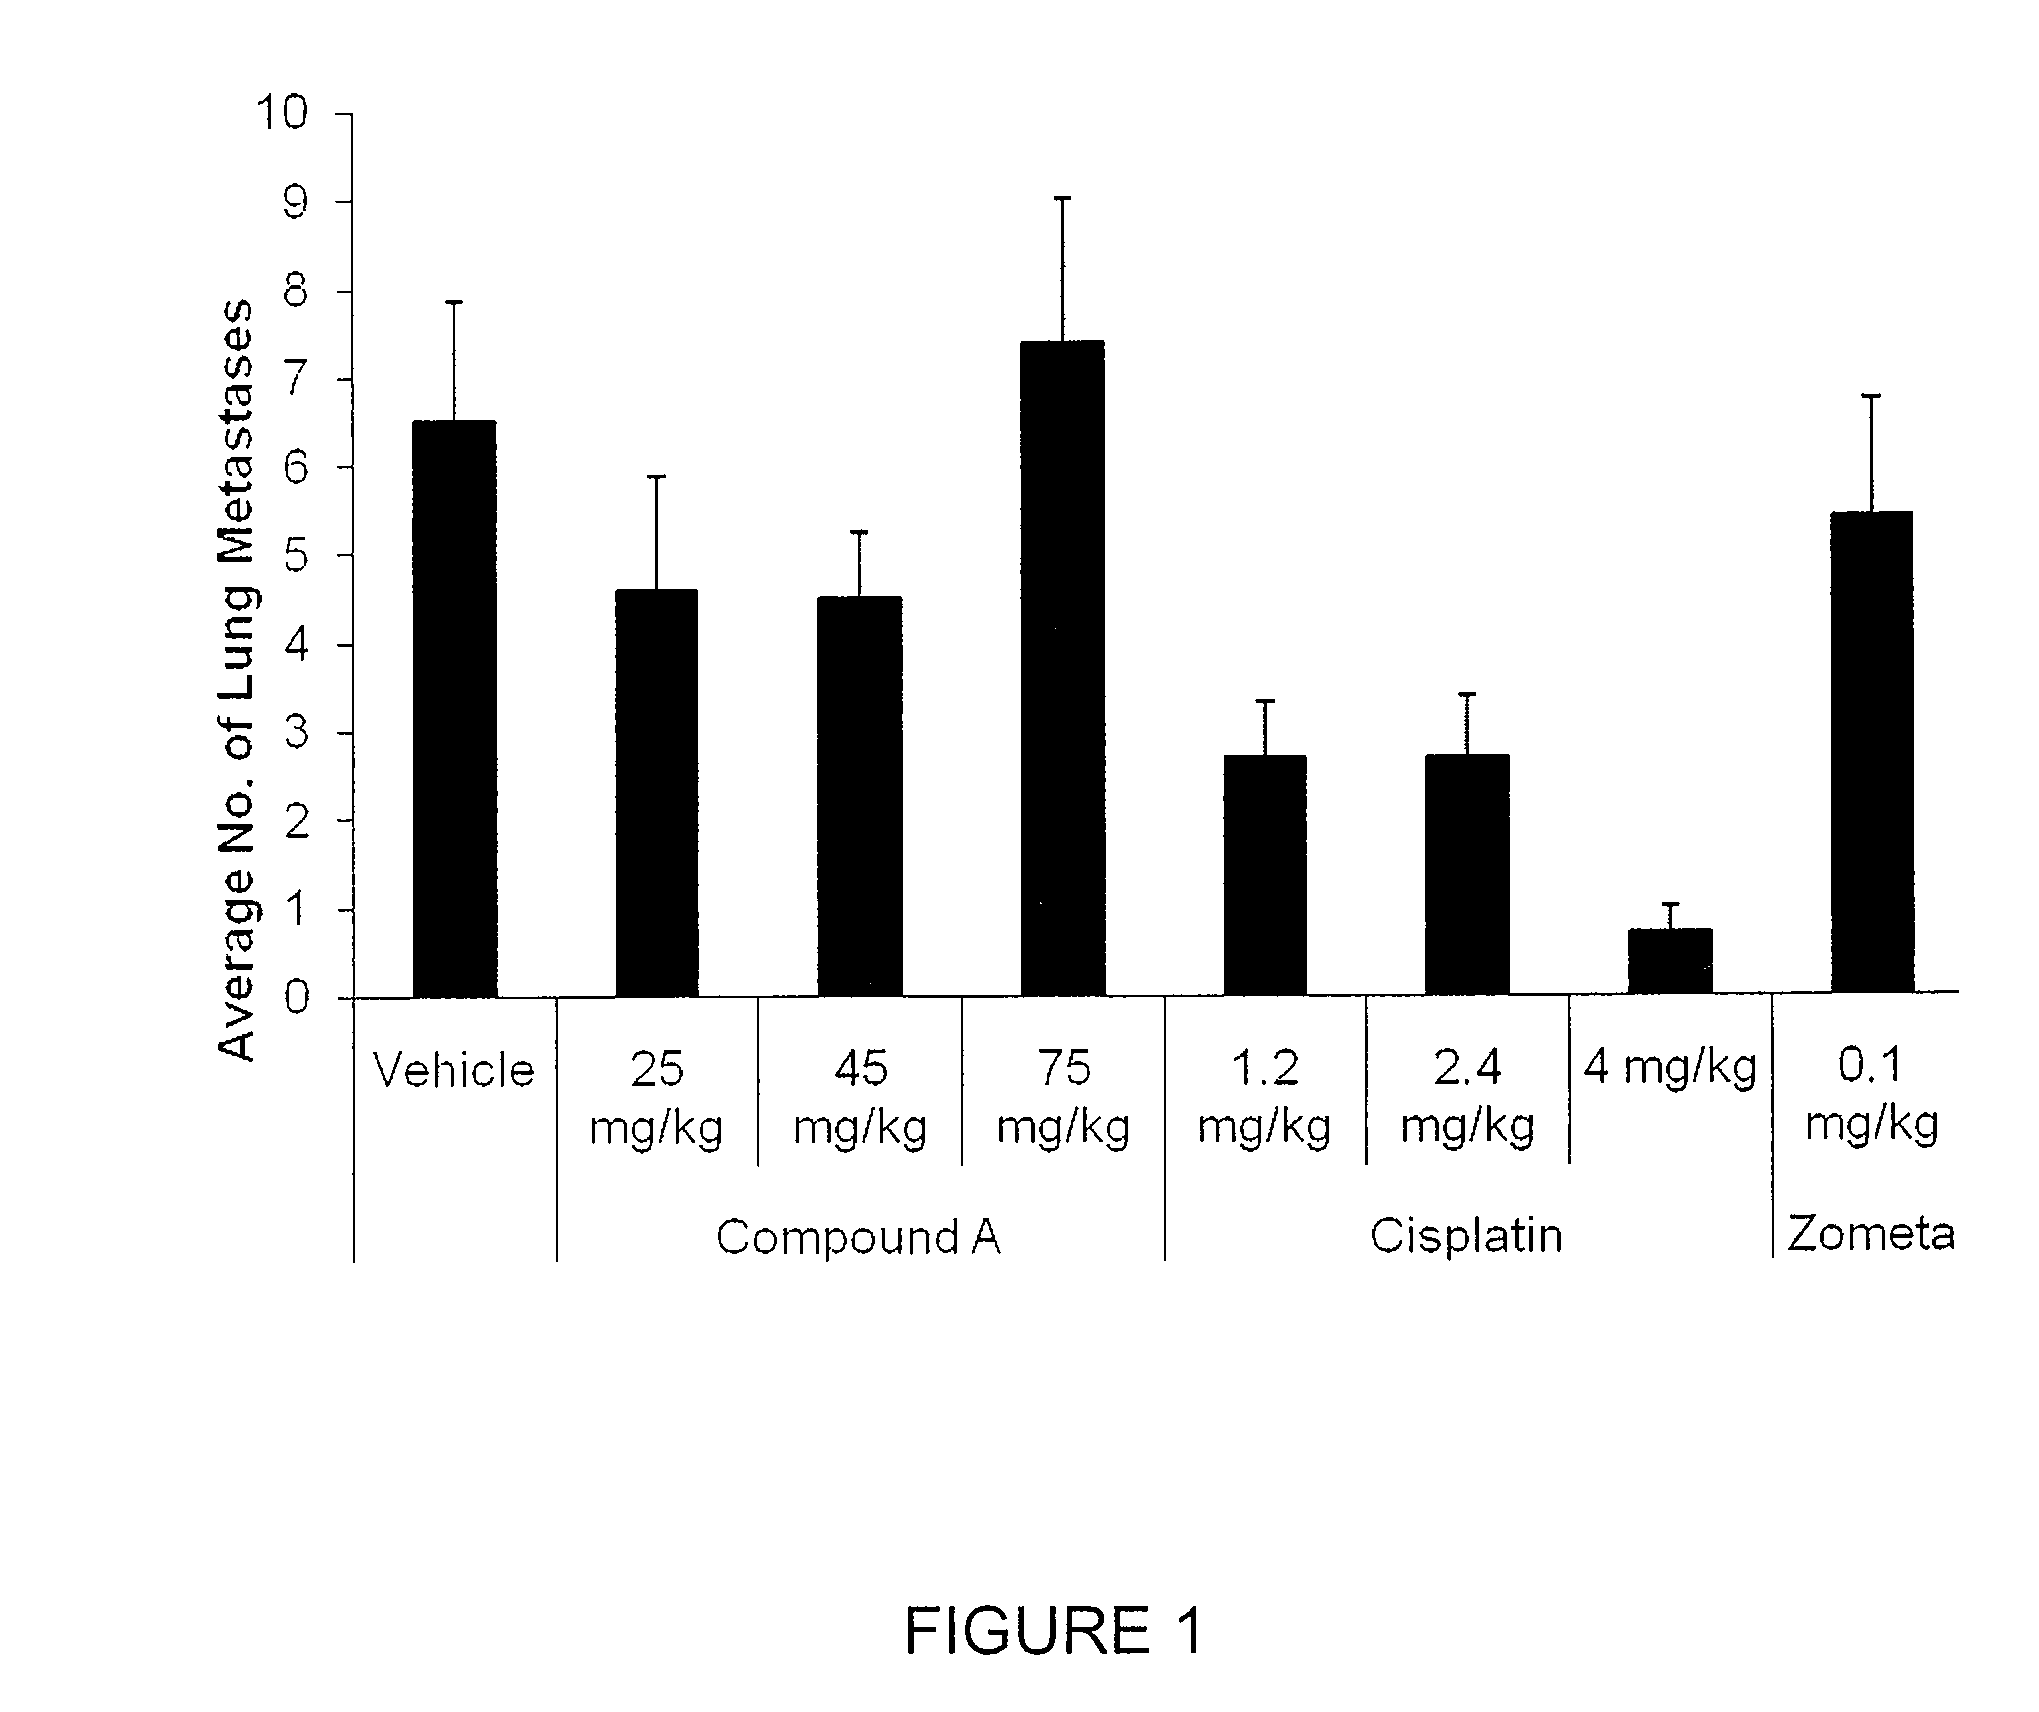 Axl inhibitors for use in combination therapy for preventing, treating or managing metastatic cancer